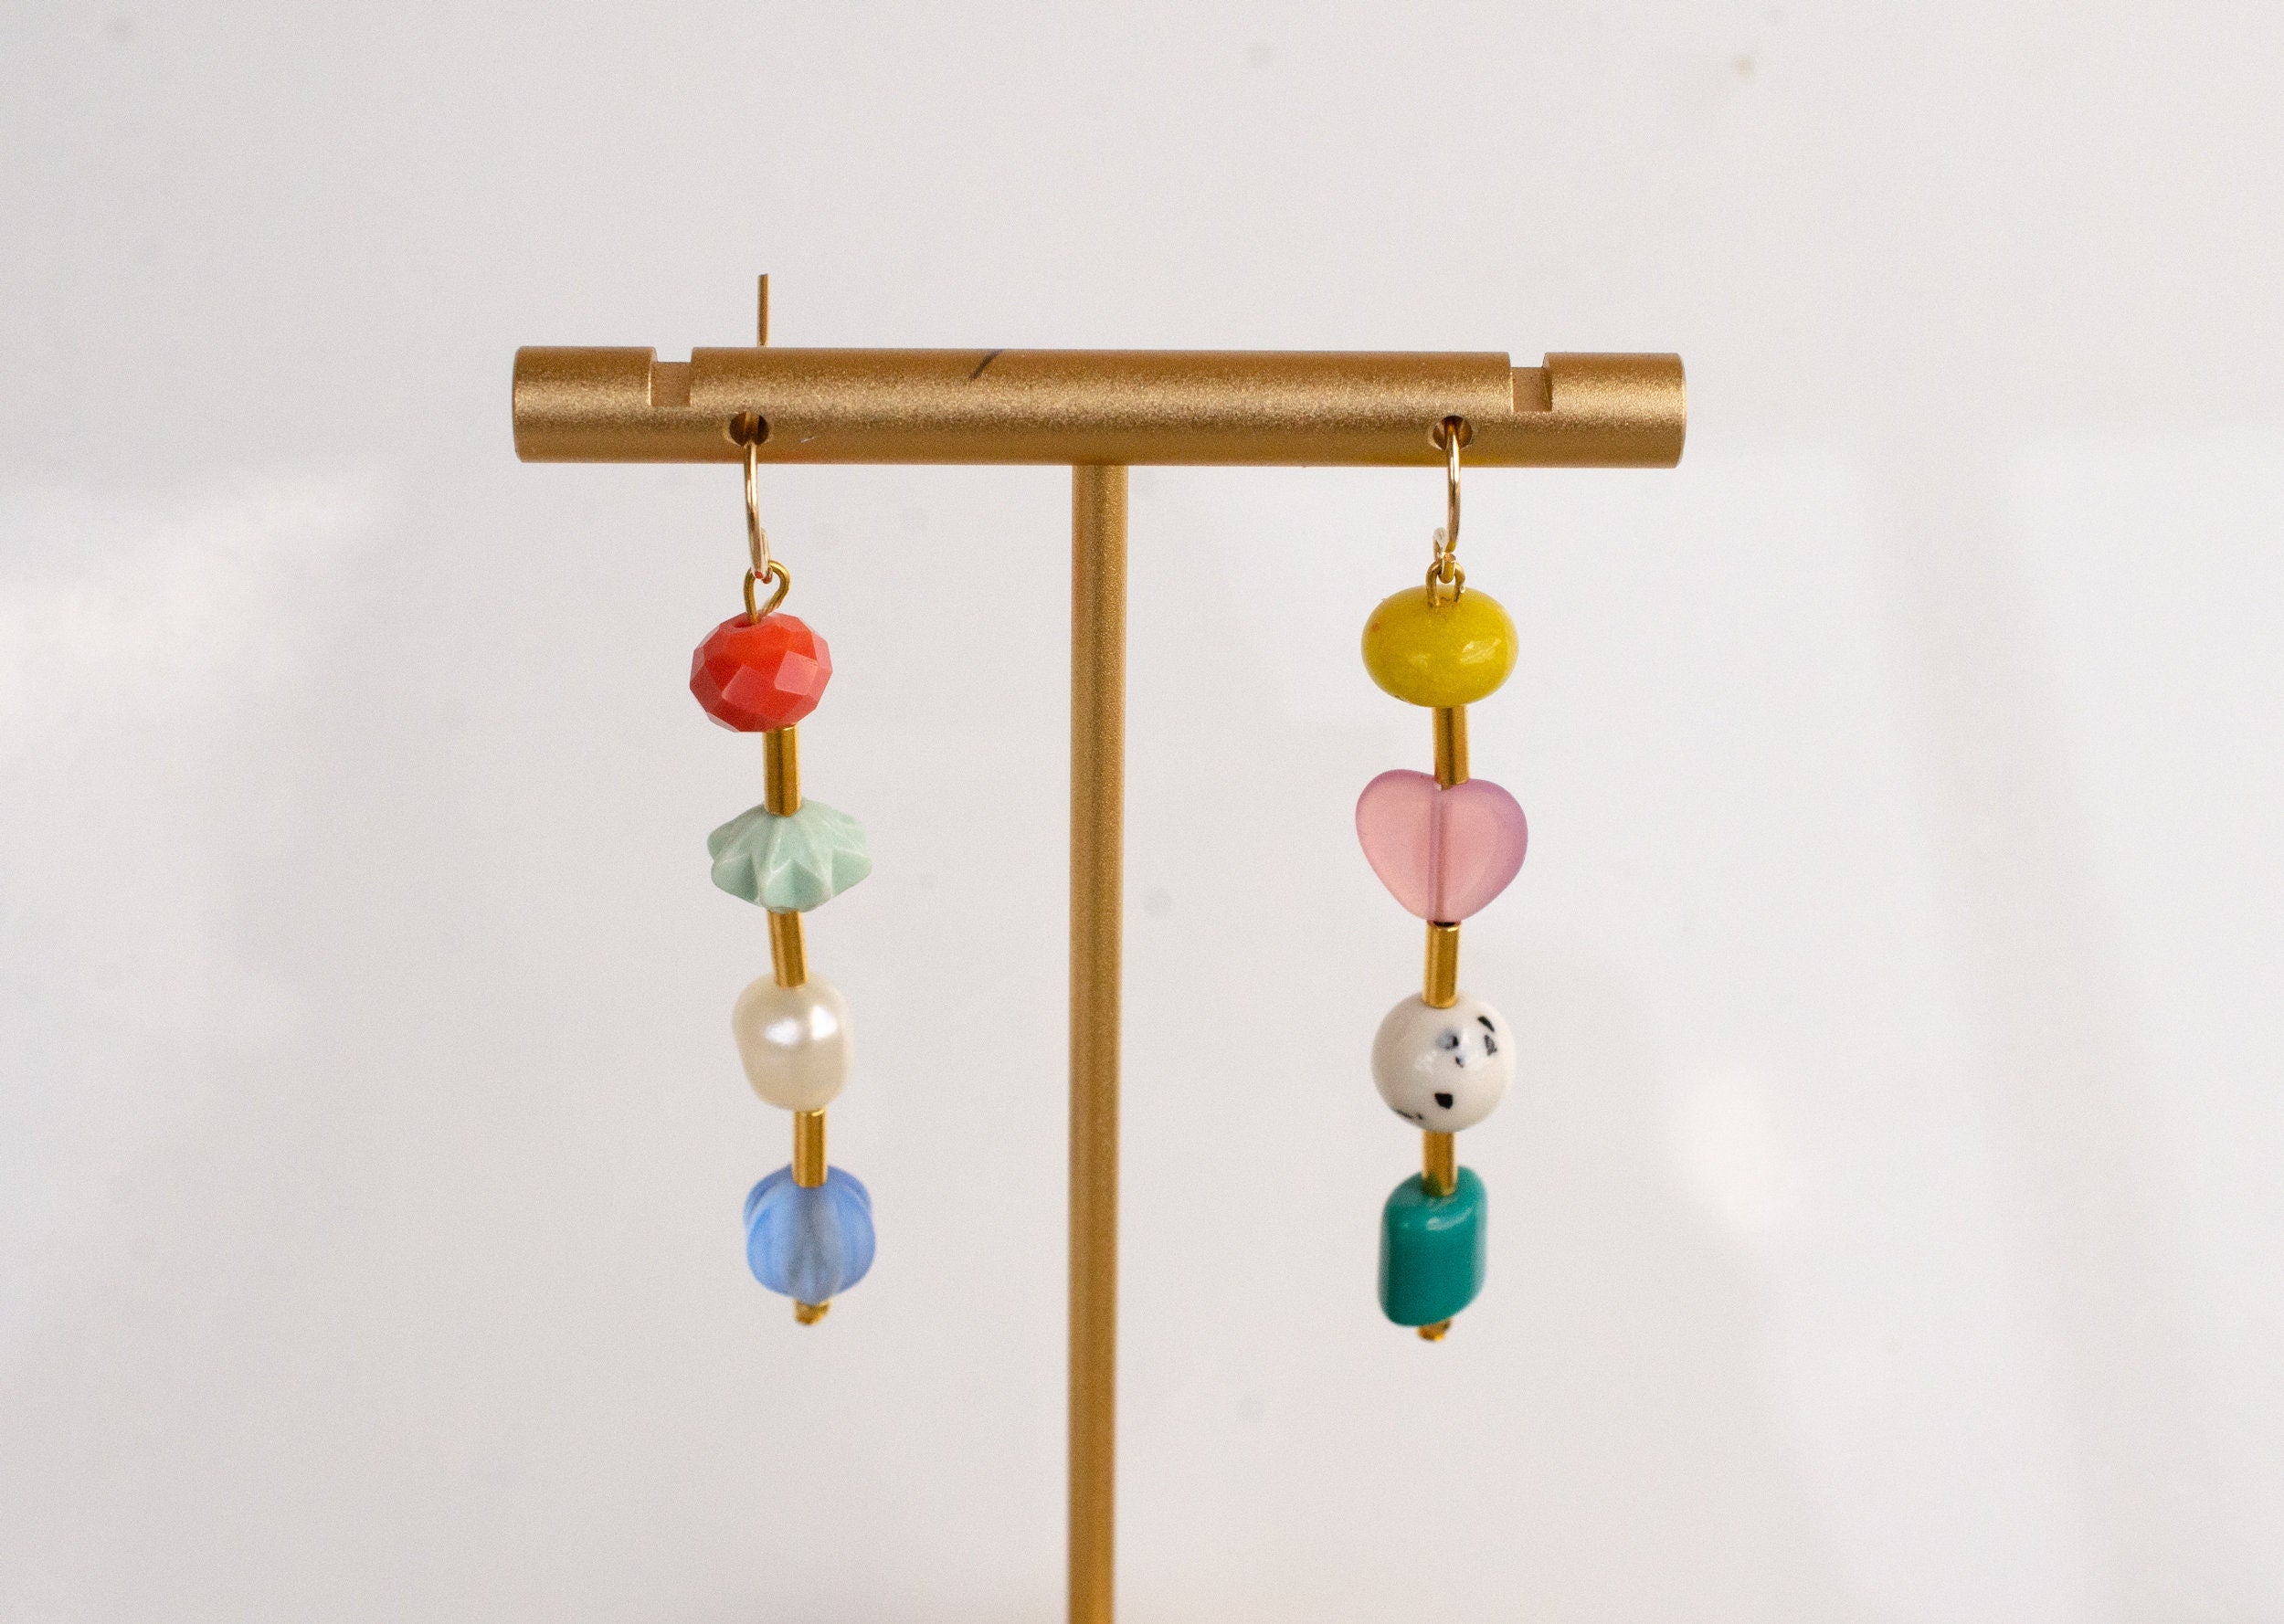 Beaded dangle Statement Earrings, Mix and Match earrings, colorful jew –  jillmakes